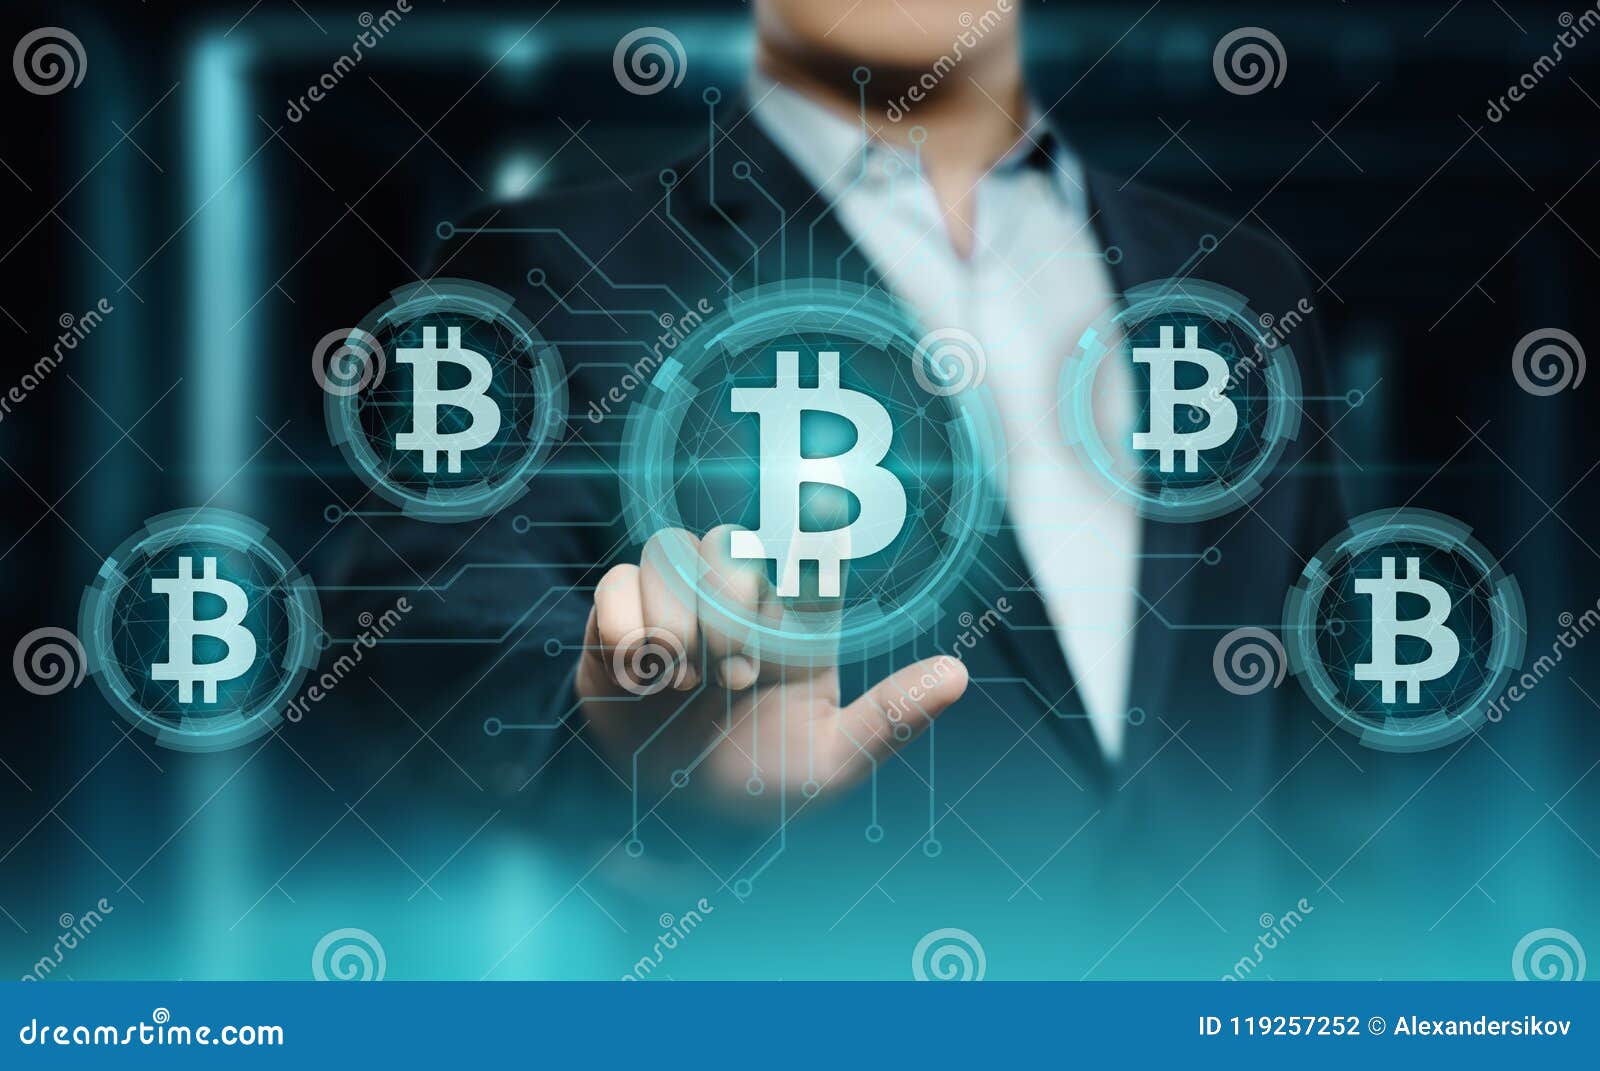 Bitcoin Cryptocurrency Digital Bit Coin Btc Currency Technology Business Internet Concept Stock Photo Image Of Blockchain Economy 119257252